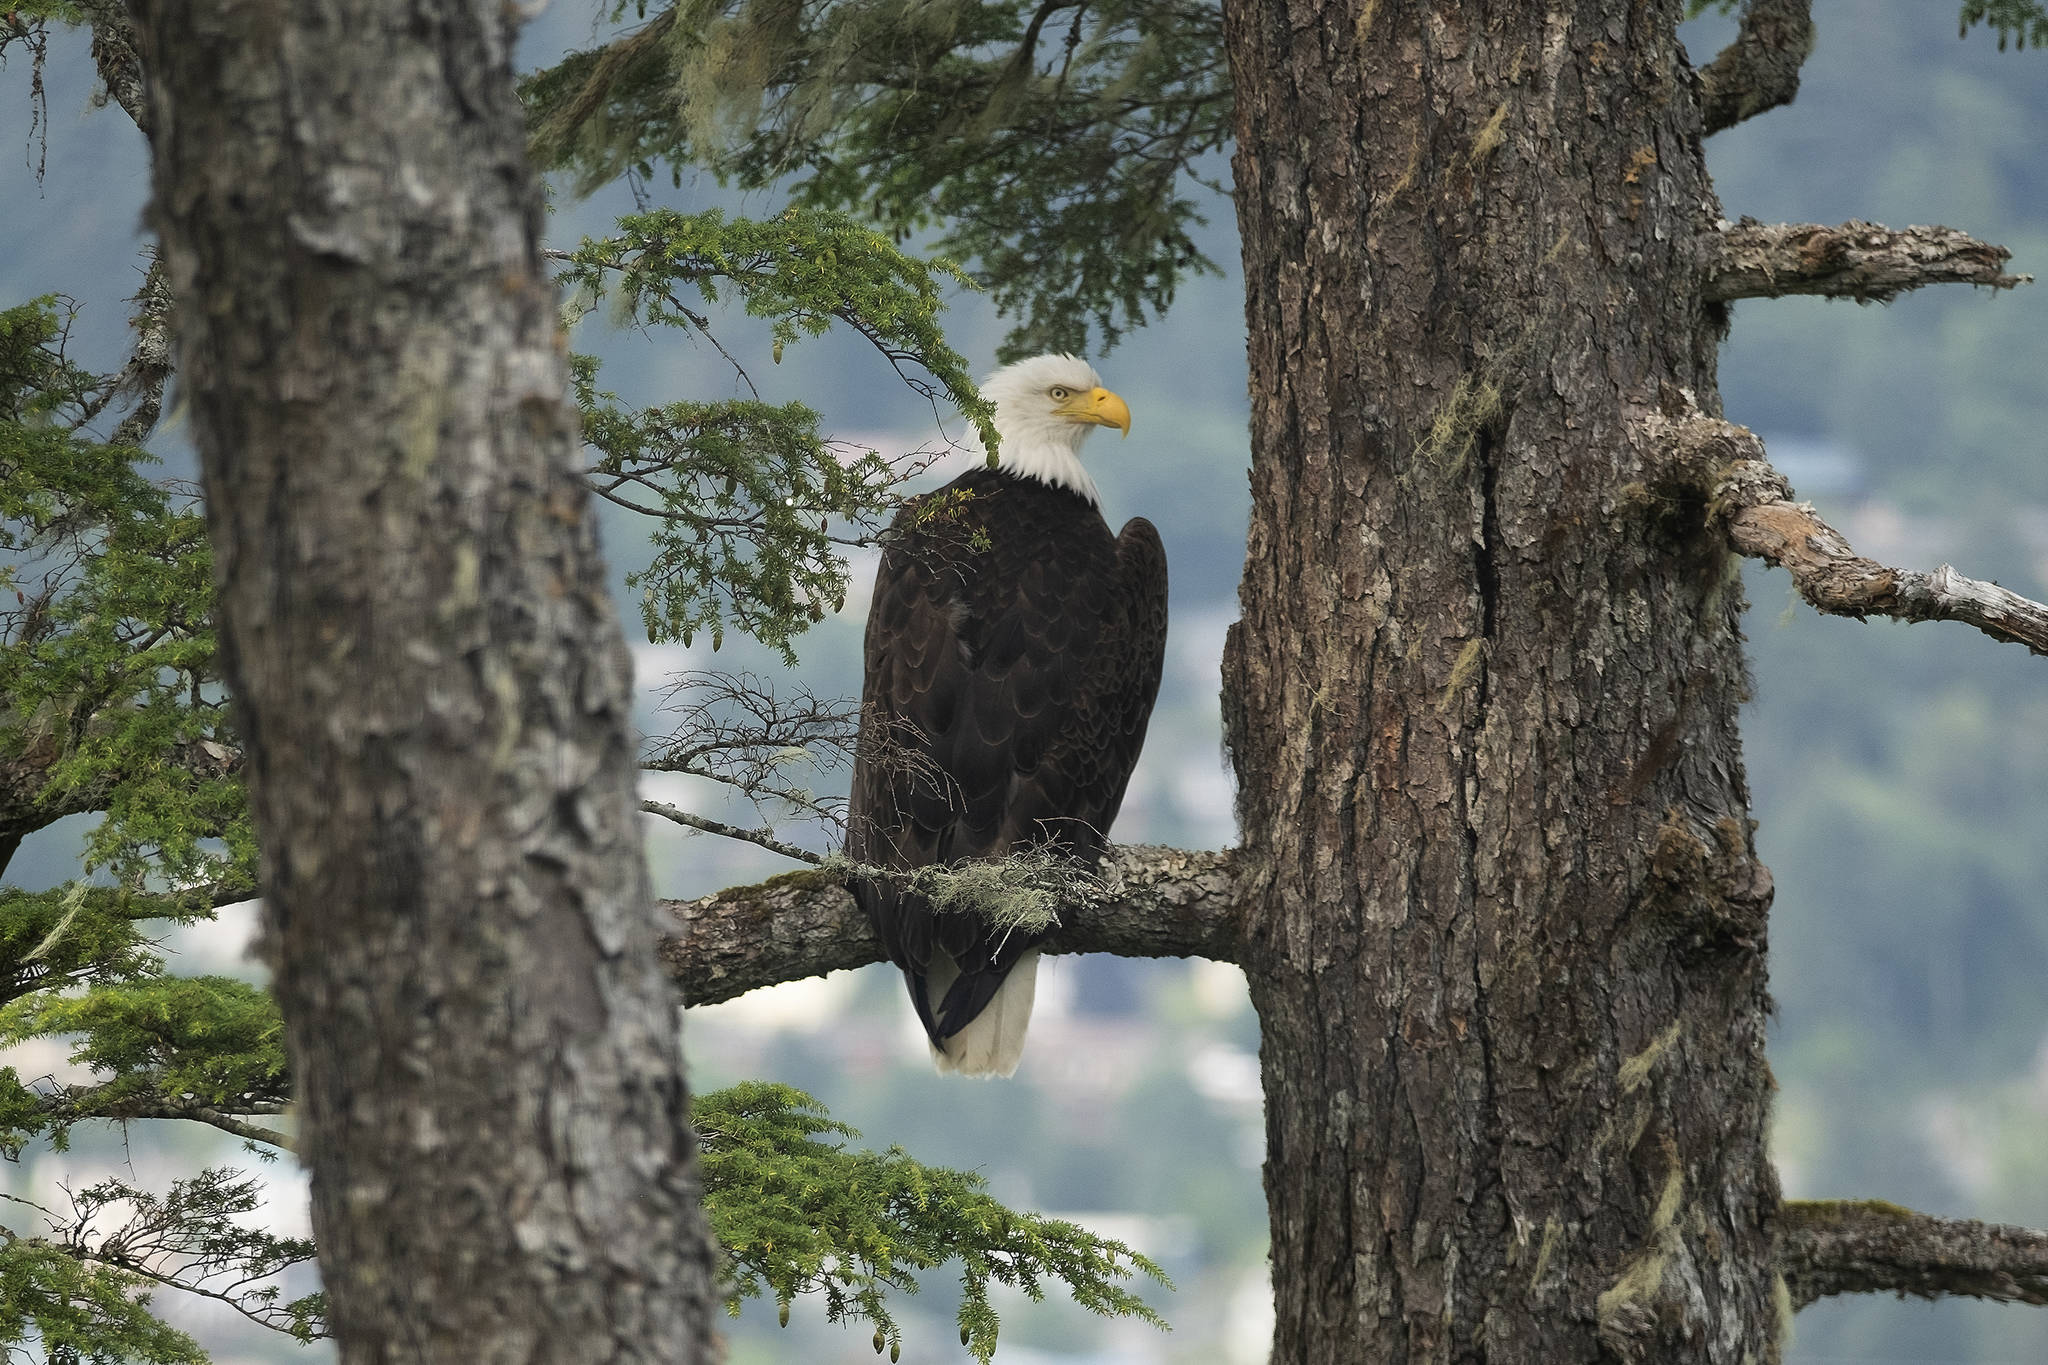 An eagle sits in a tree overlooking Juneau in this photo shared on Sept. 3, 2020. (Courtesy Photo / Tom Matthews)